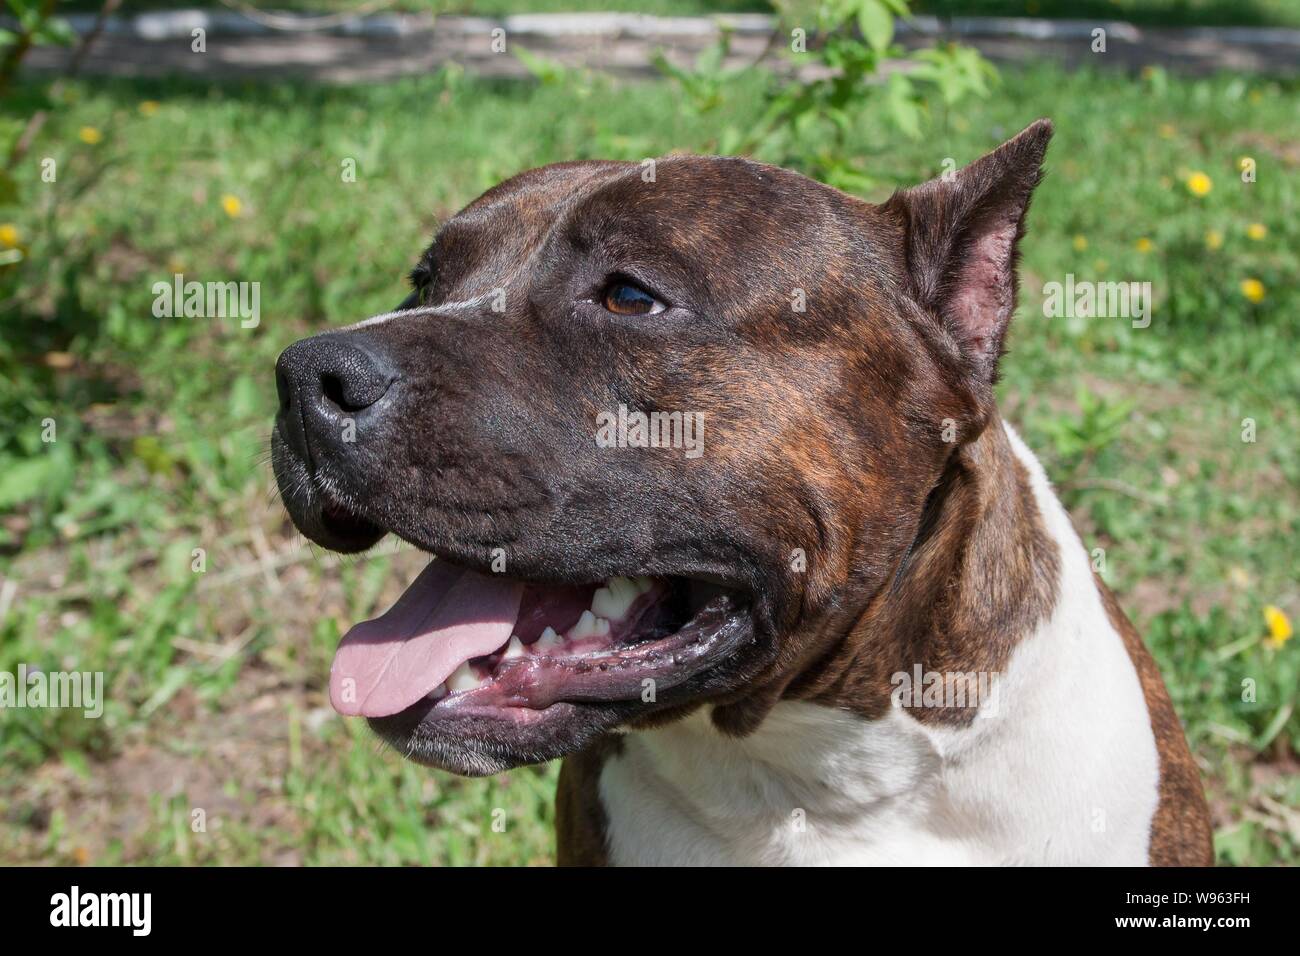 American staffordshire terrier puppy close up. Pet animals. Ten month old. Stock Photo